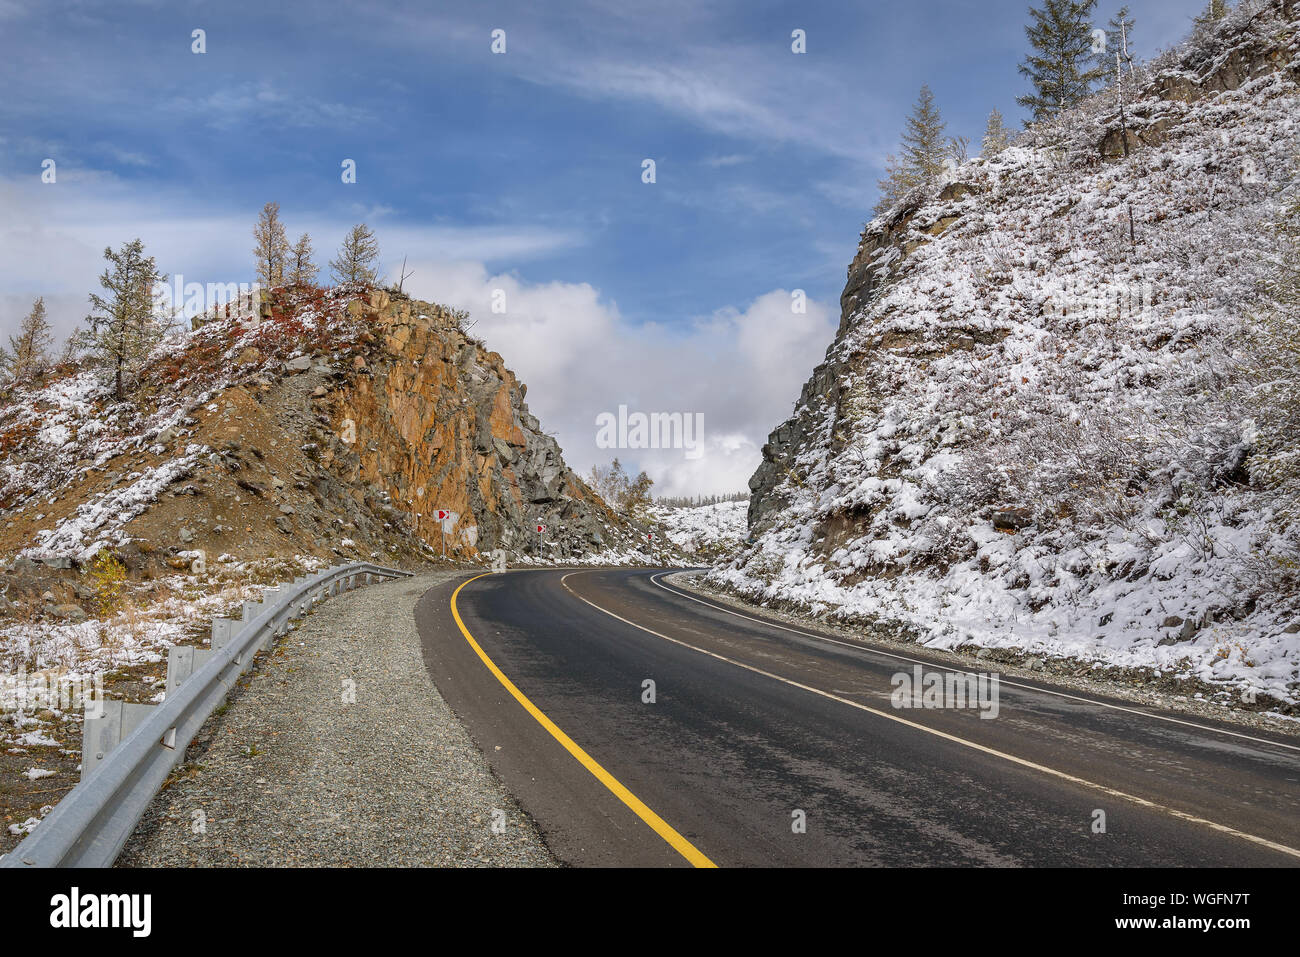 Scenic view of the hairpin bend wet winding road through the pass, part of the mountain serpentine, in autumn cloudy weather with first snow Stock Photo